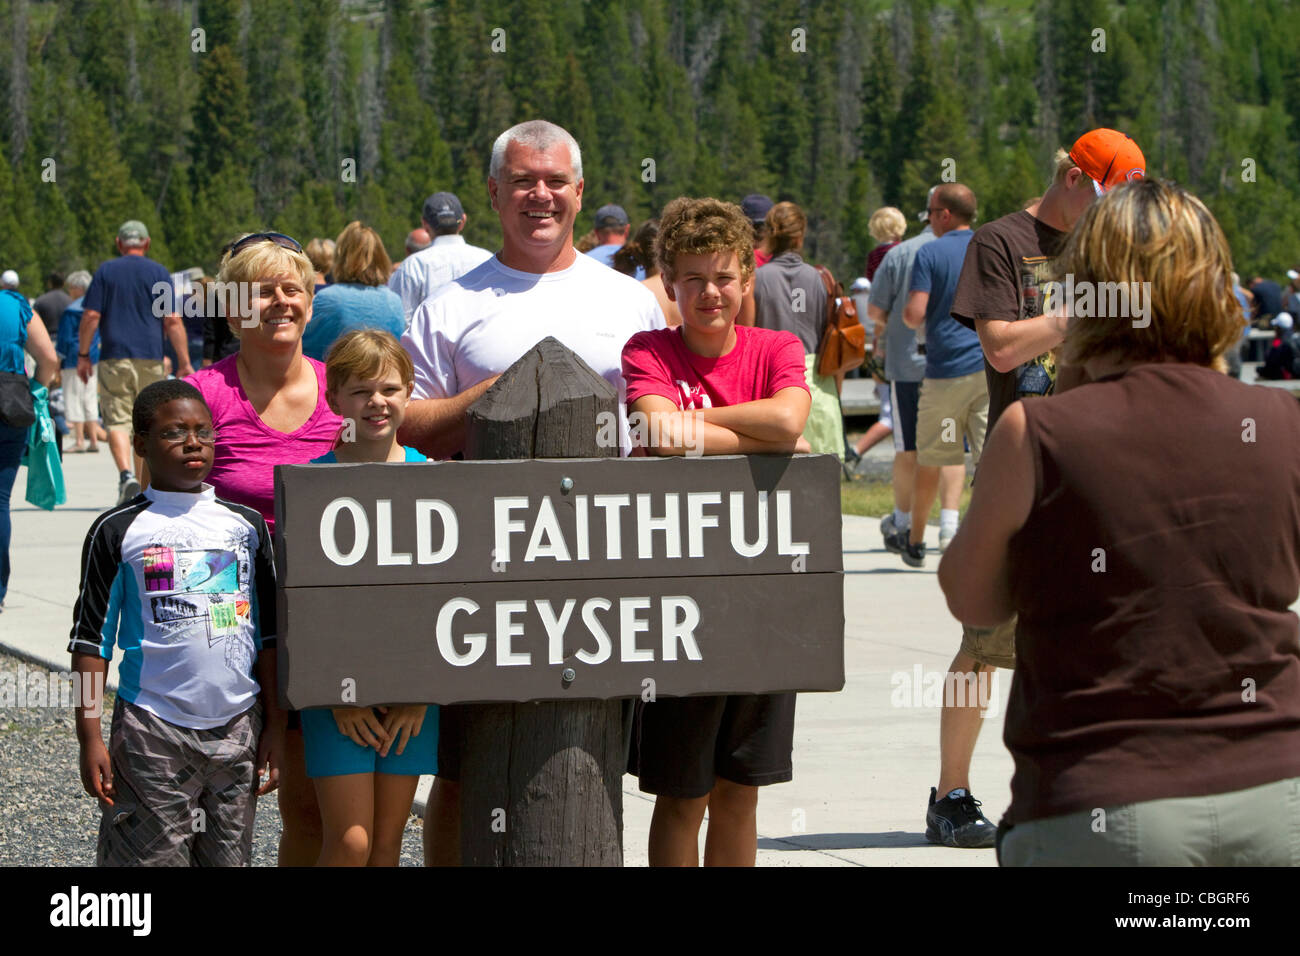 Tourists pose for a photo at Old Faithful geyser in Yellowstone National Park, Wyoming, USA. Stock Photo